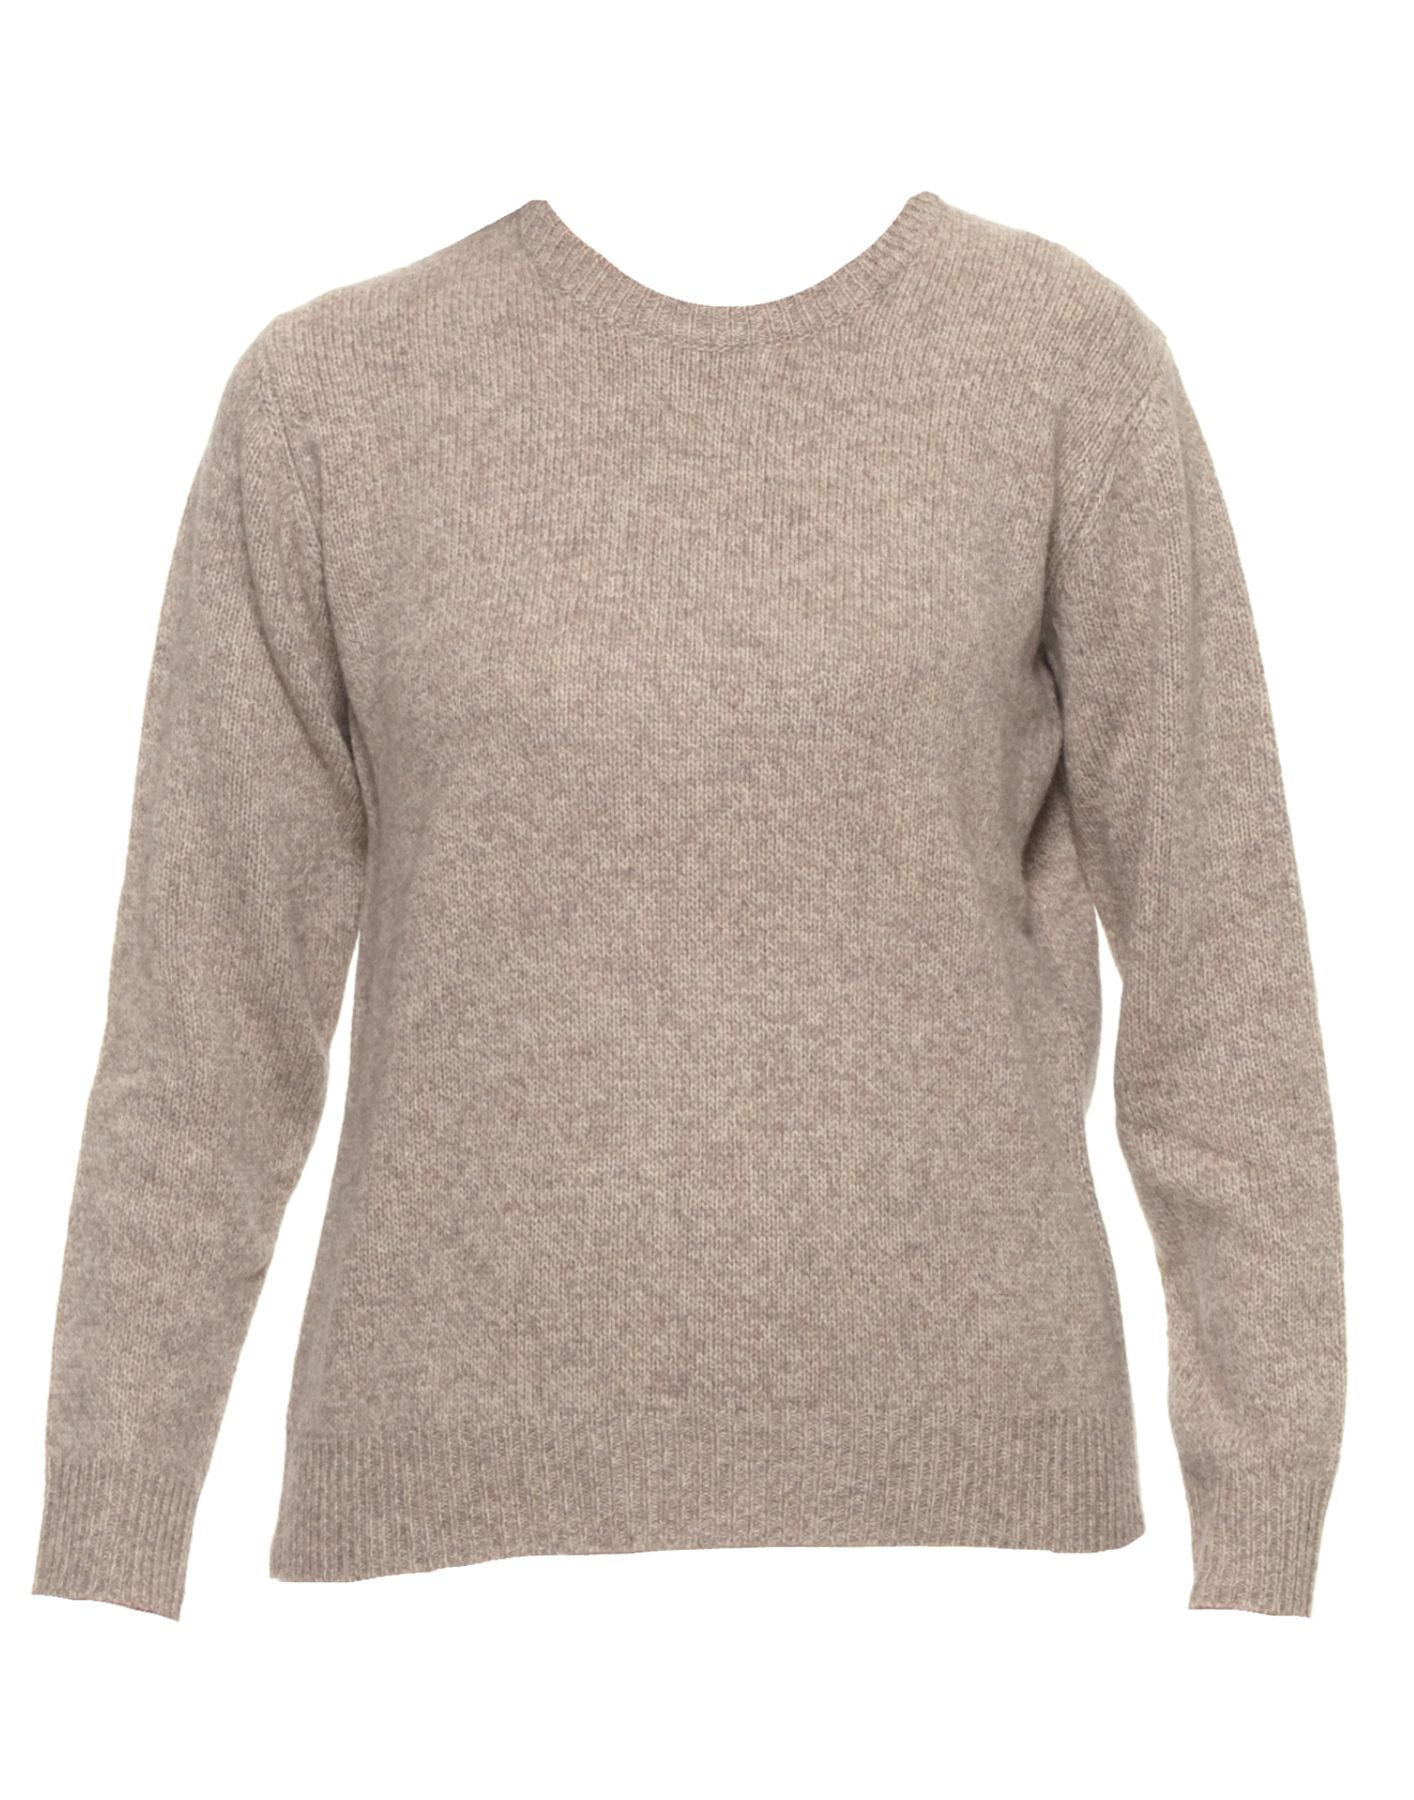 Sweater woman CT20391 C.T. plage